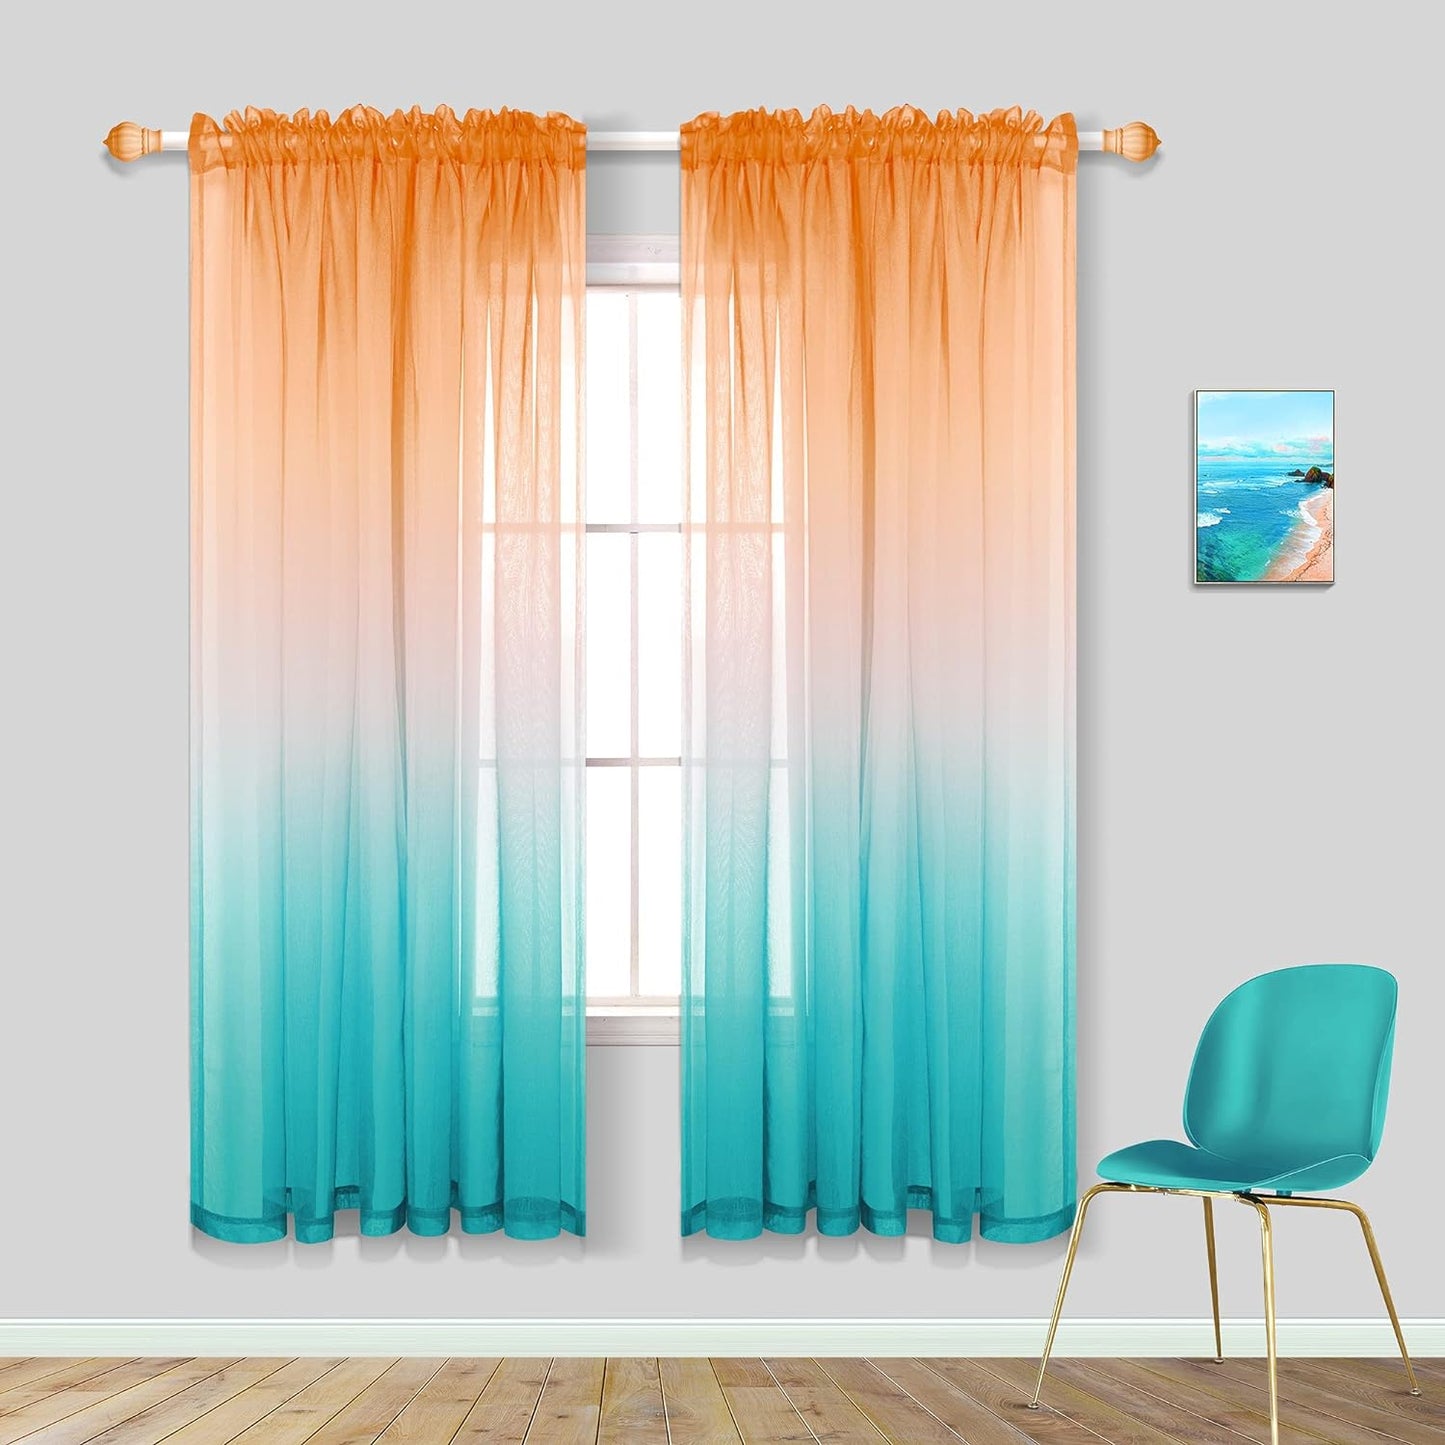 Spring Sheer Curtains for Living Room with Rod Pocket Window Treatments Decor 84 Inch Length Bedroom Curtain Set of 2 Panels Yellow and Grey Gray  PITALK TEXTILE Orange And Turquoise 52X63 